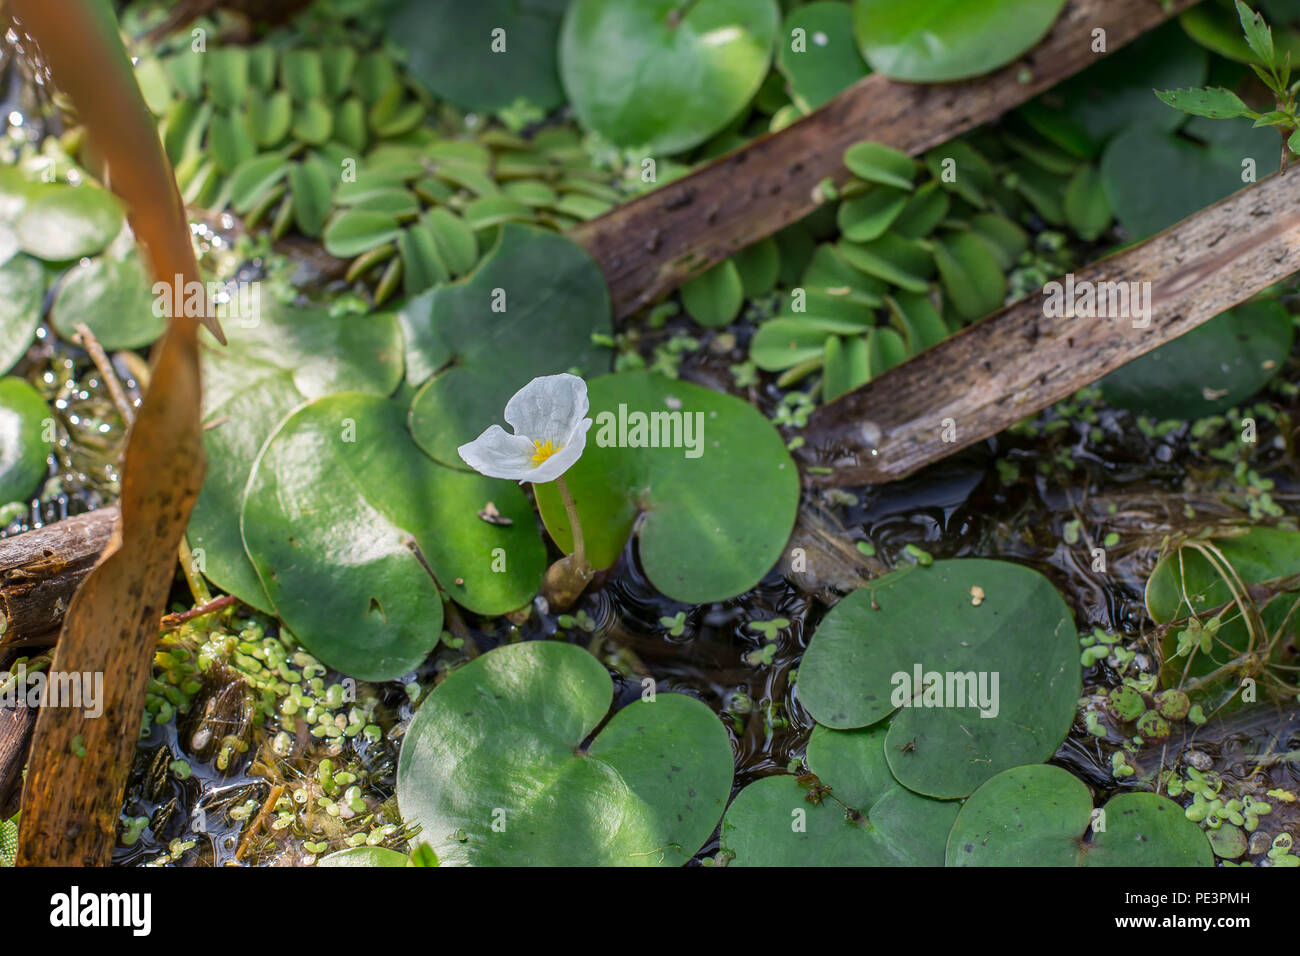 Floating leaves and flower of frogbit Hydrocharis morsus-ranae Stock Photo